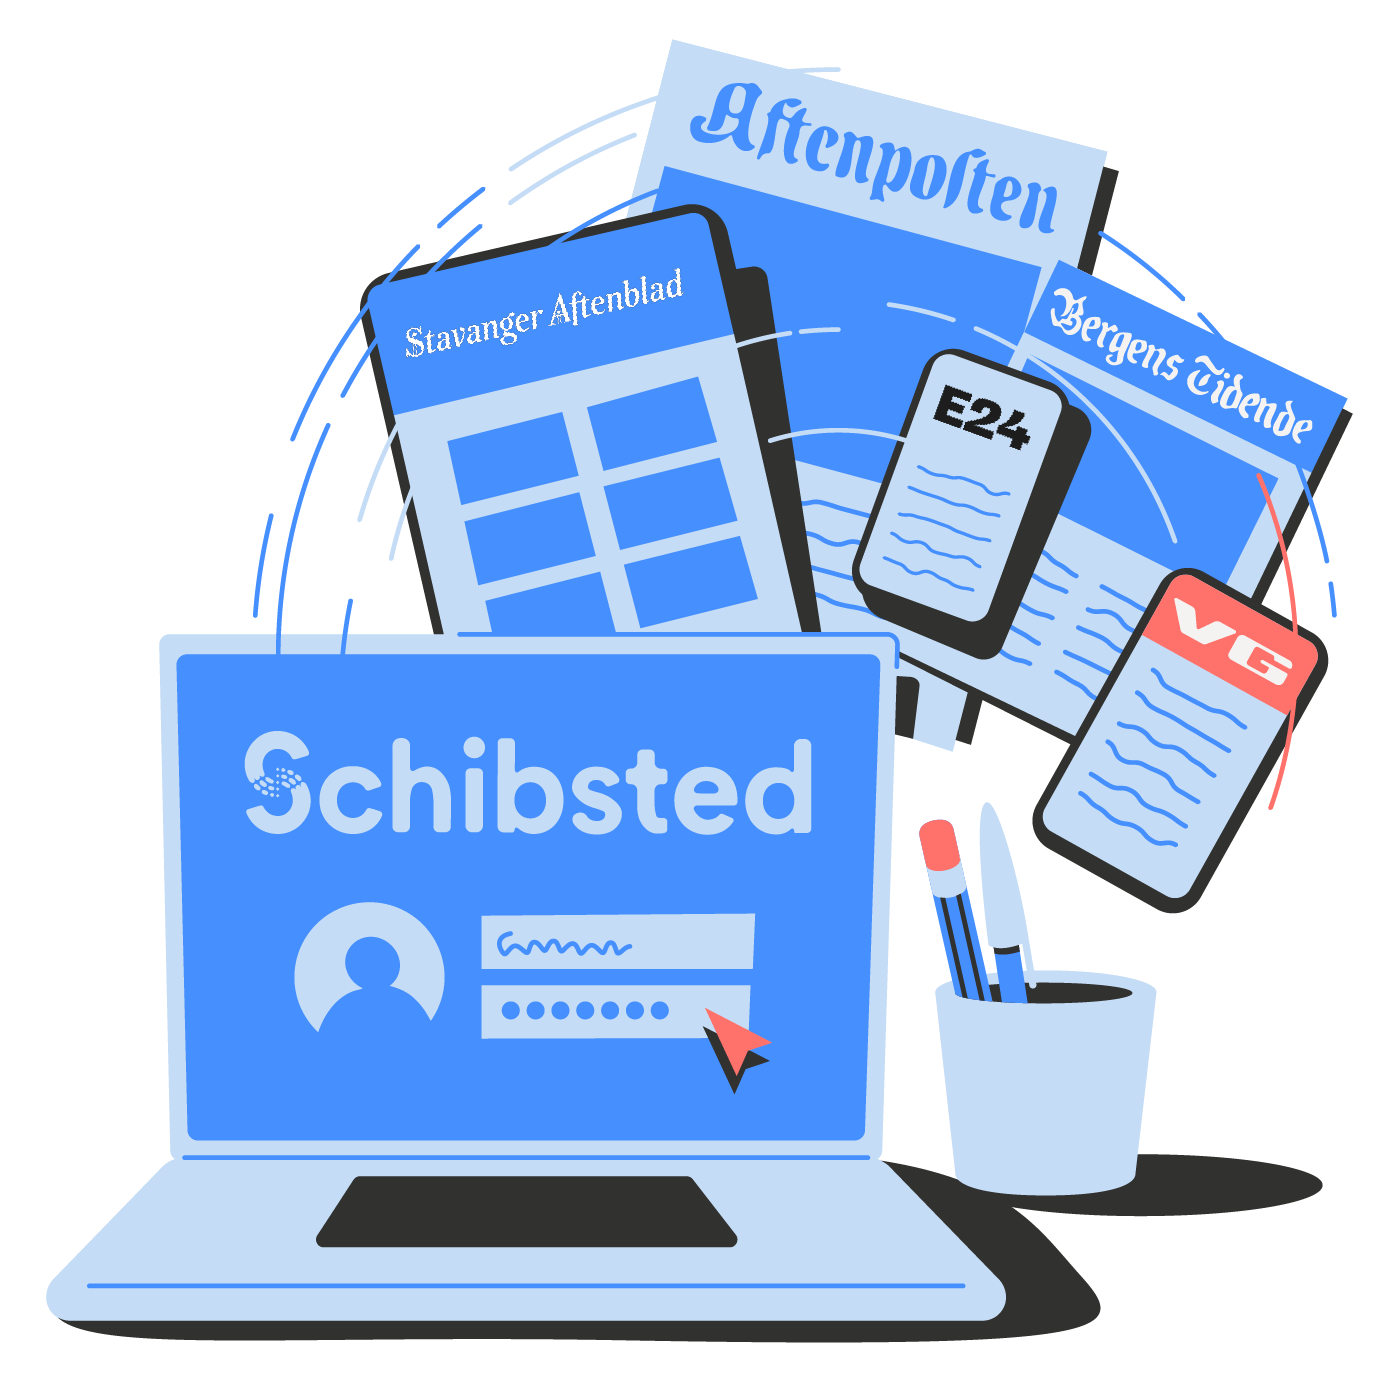 Schibsted news media provides coverage on all online media